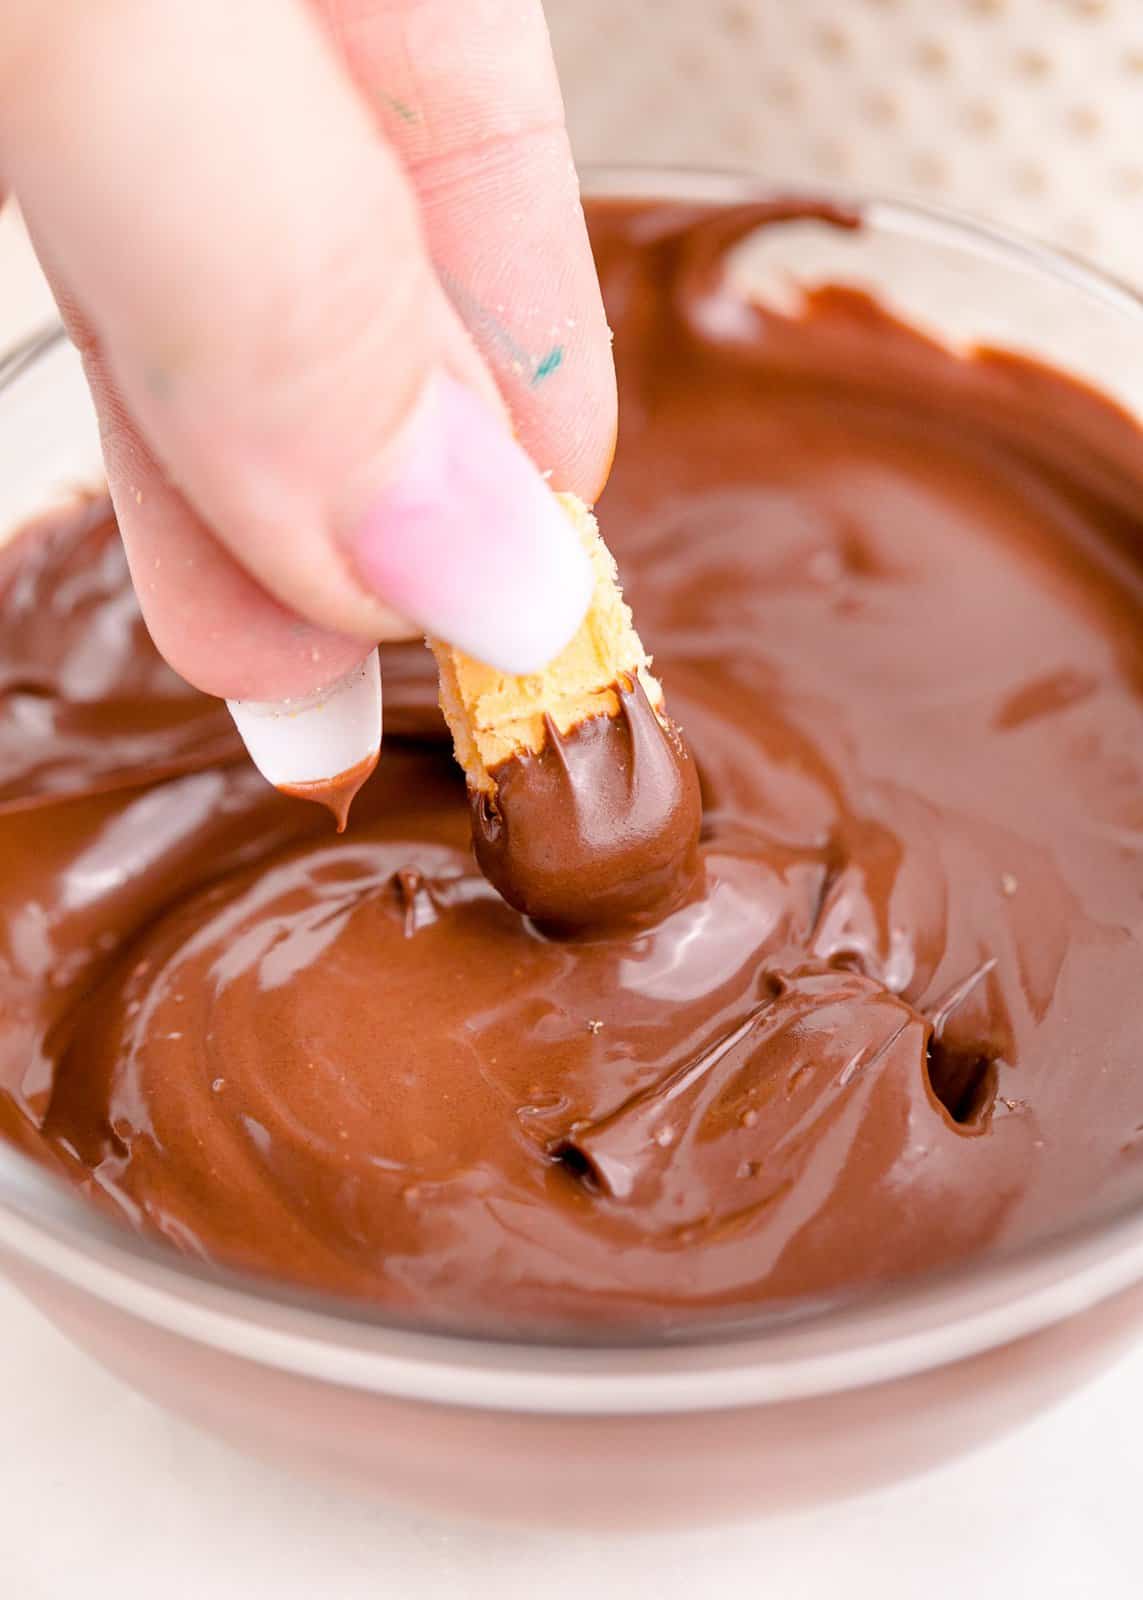 Melted chocolate with wafer cookie being dipped into it.